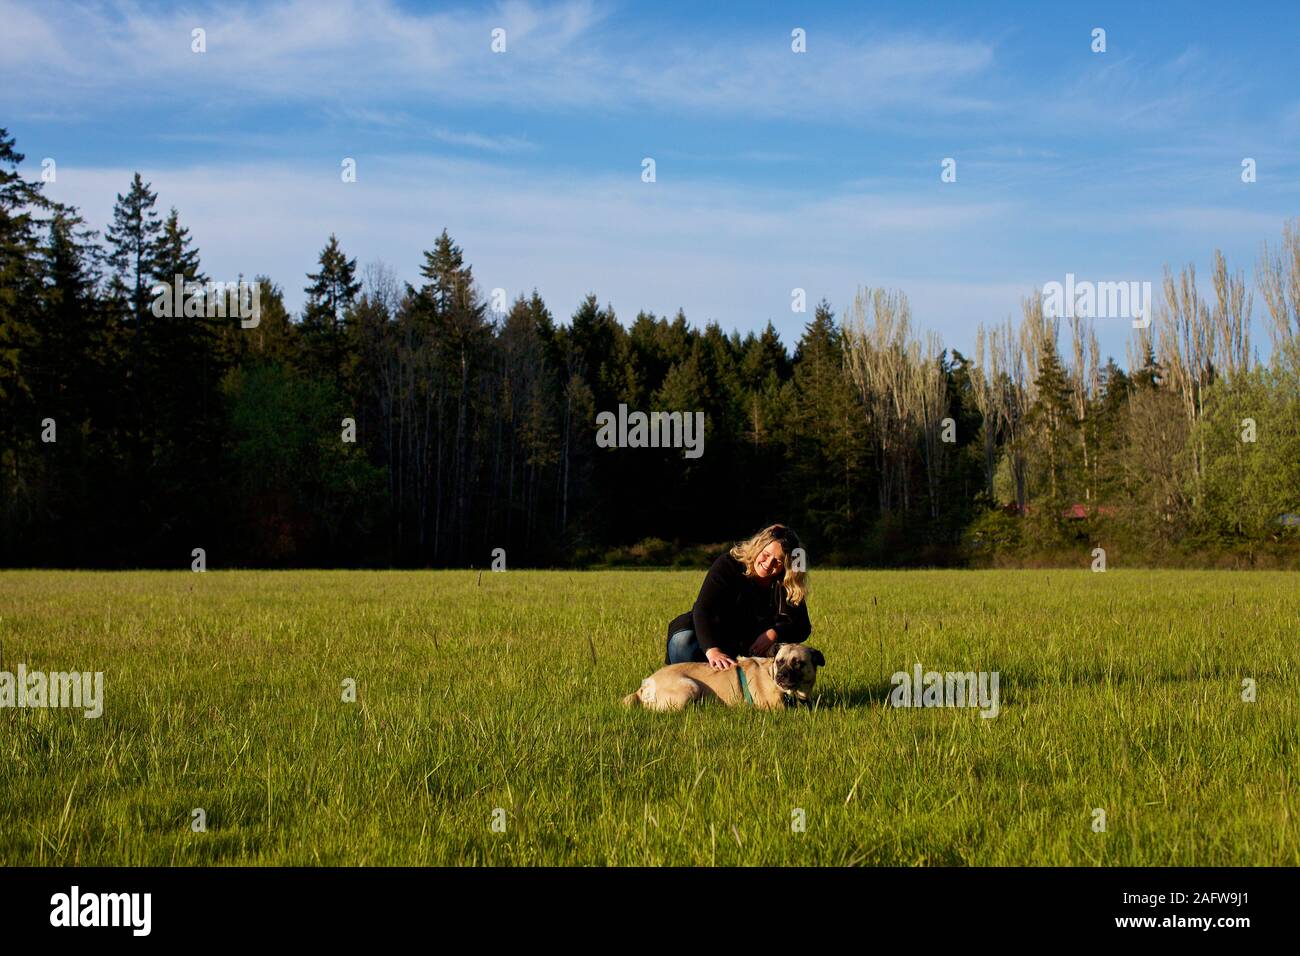 Woman with dog in sunny, rural field Stock Photo